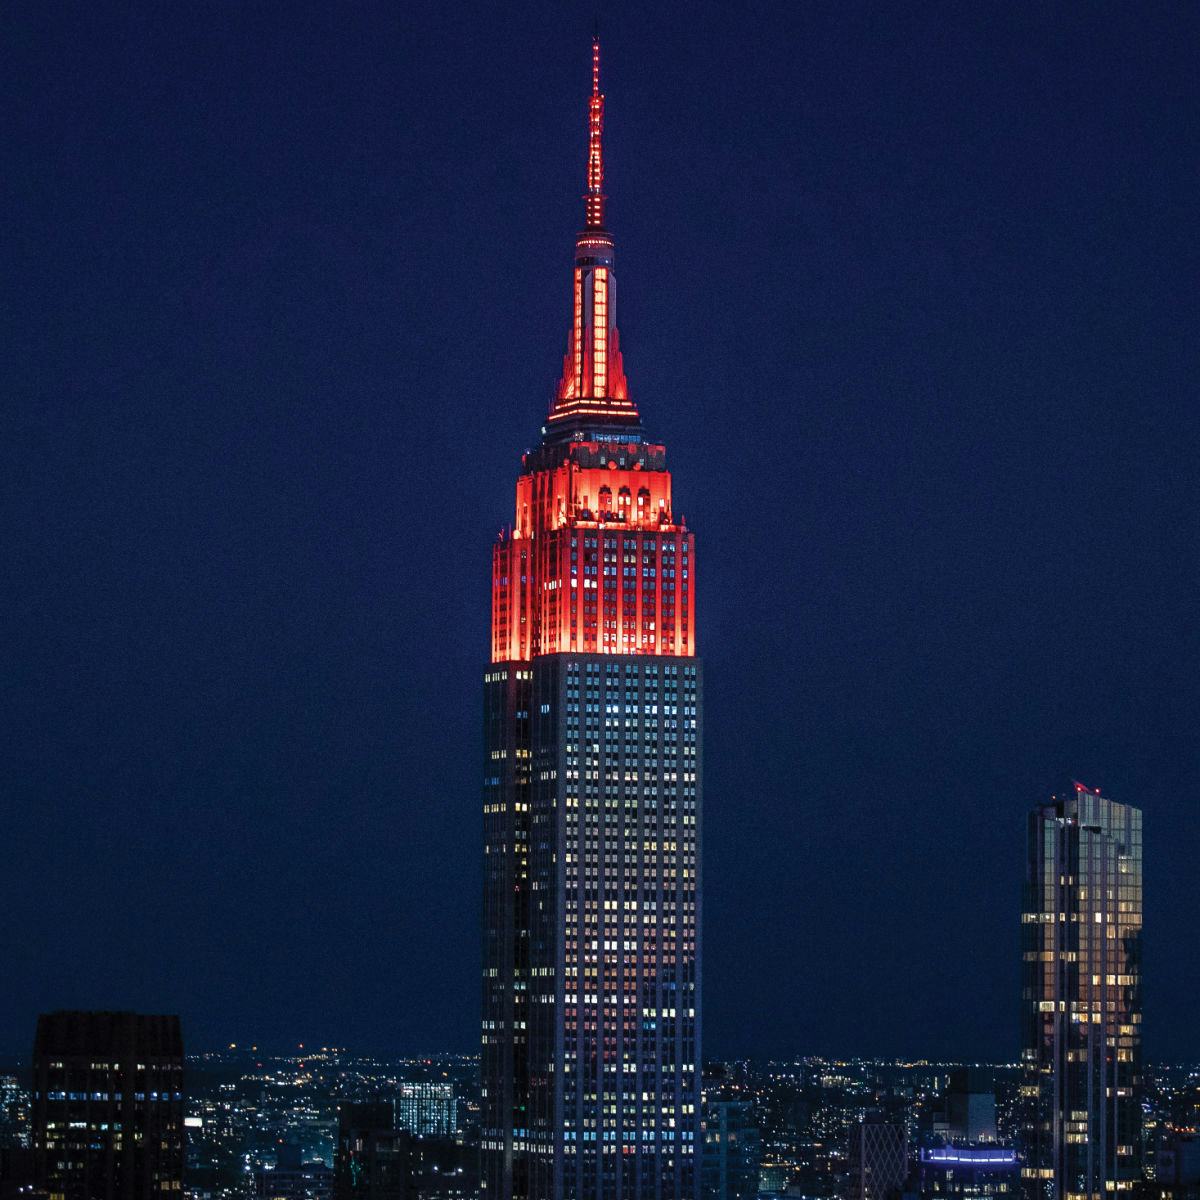 Empire State building at night lit up in Stevens red.